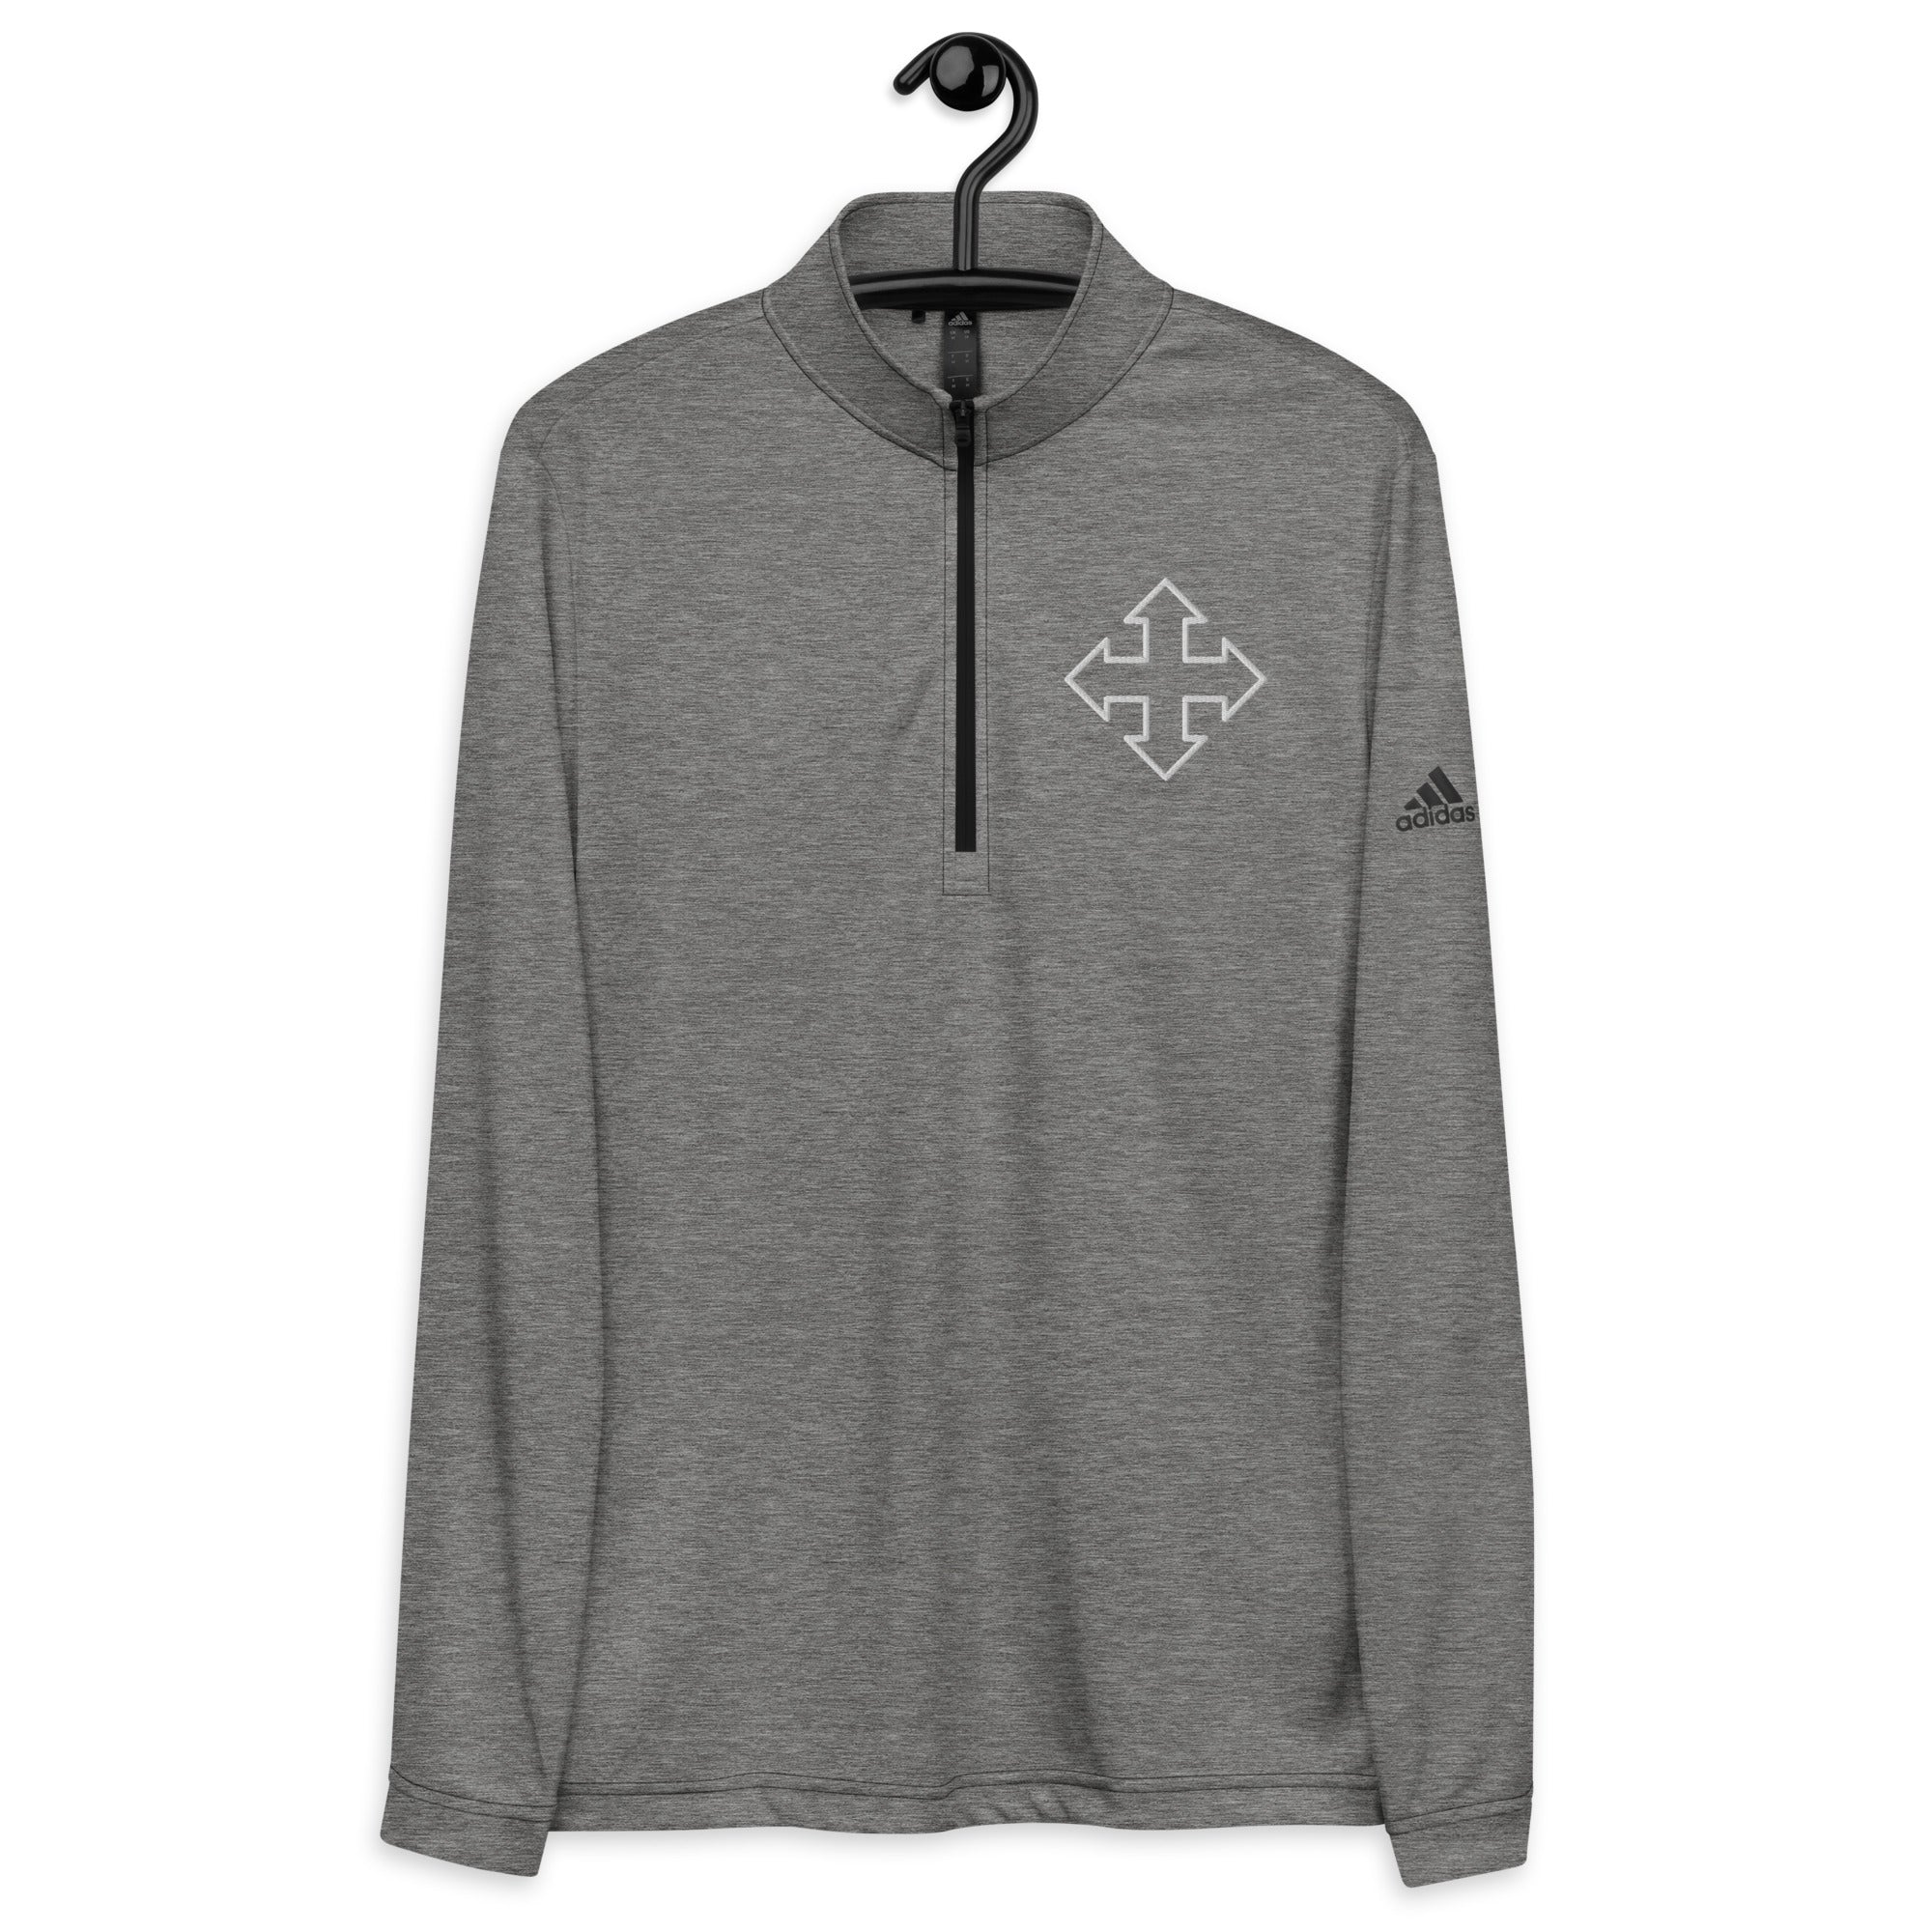 Quarter zip pullover, Workout, Eco-friendly, lightweight, comfortable, gift